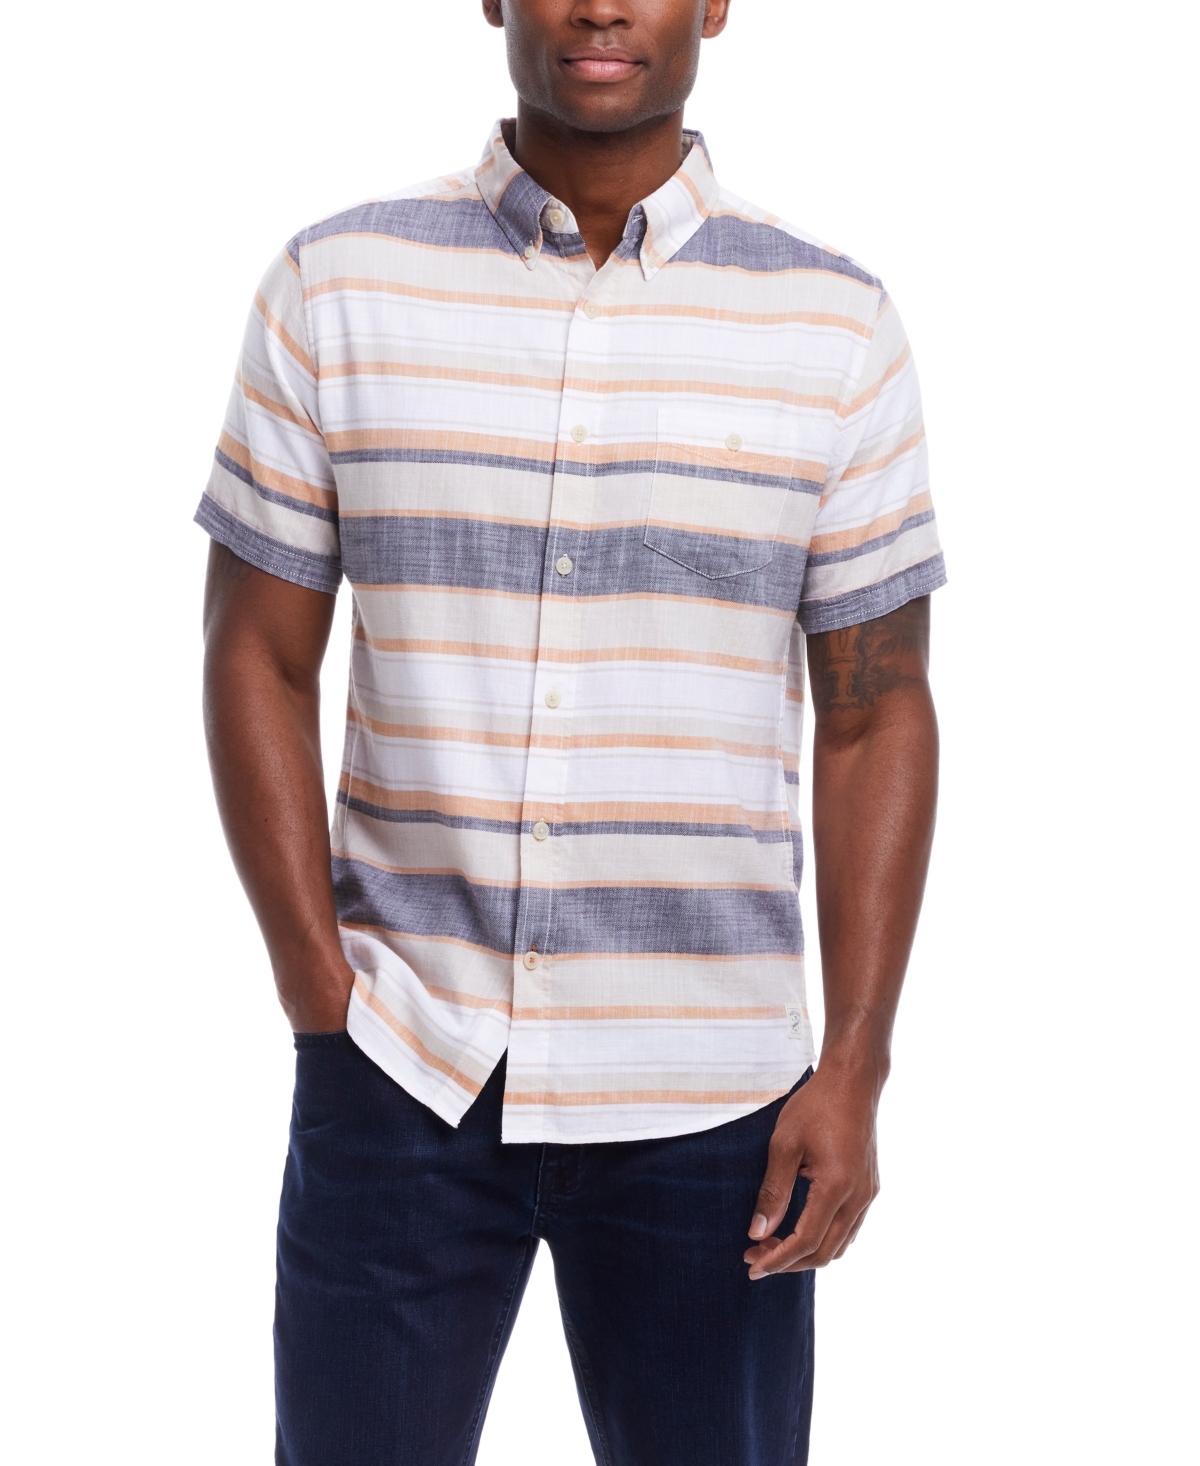 Men's Short Sleeve Country Twill Cotton Shirt - Wheat